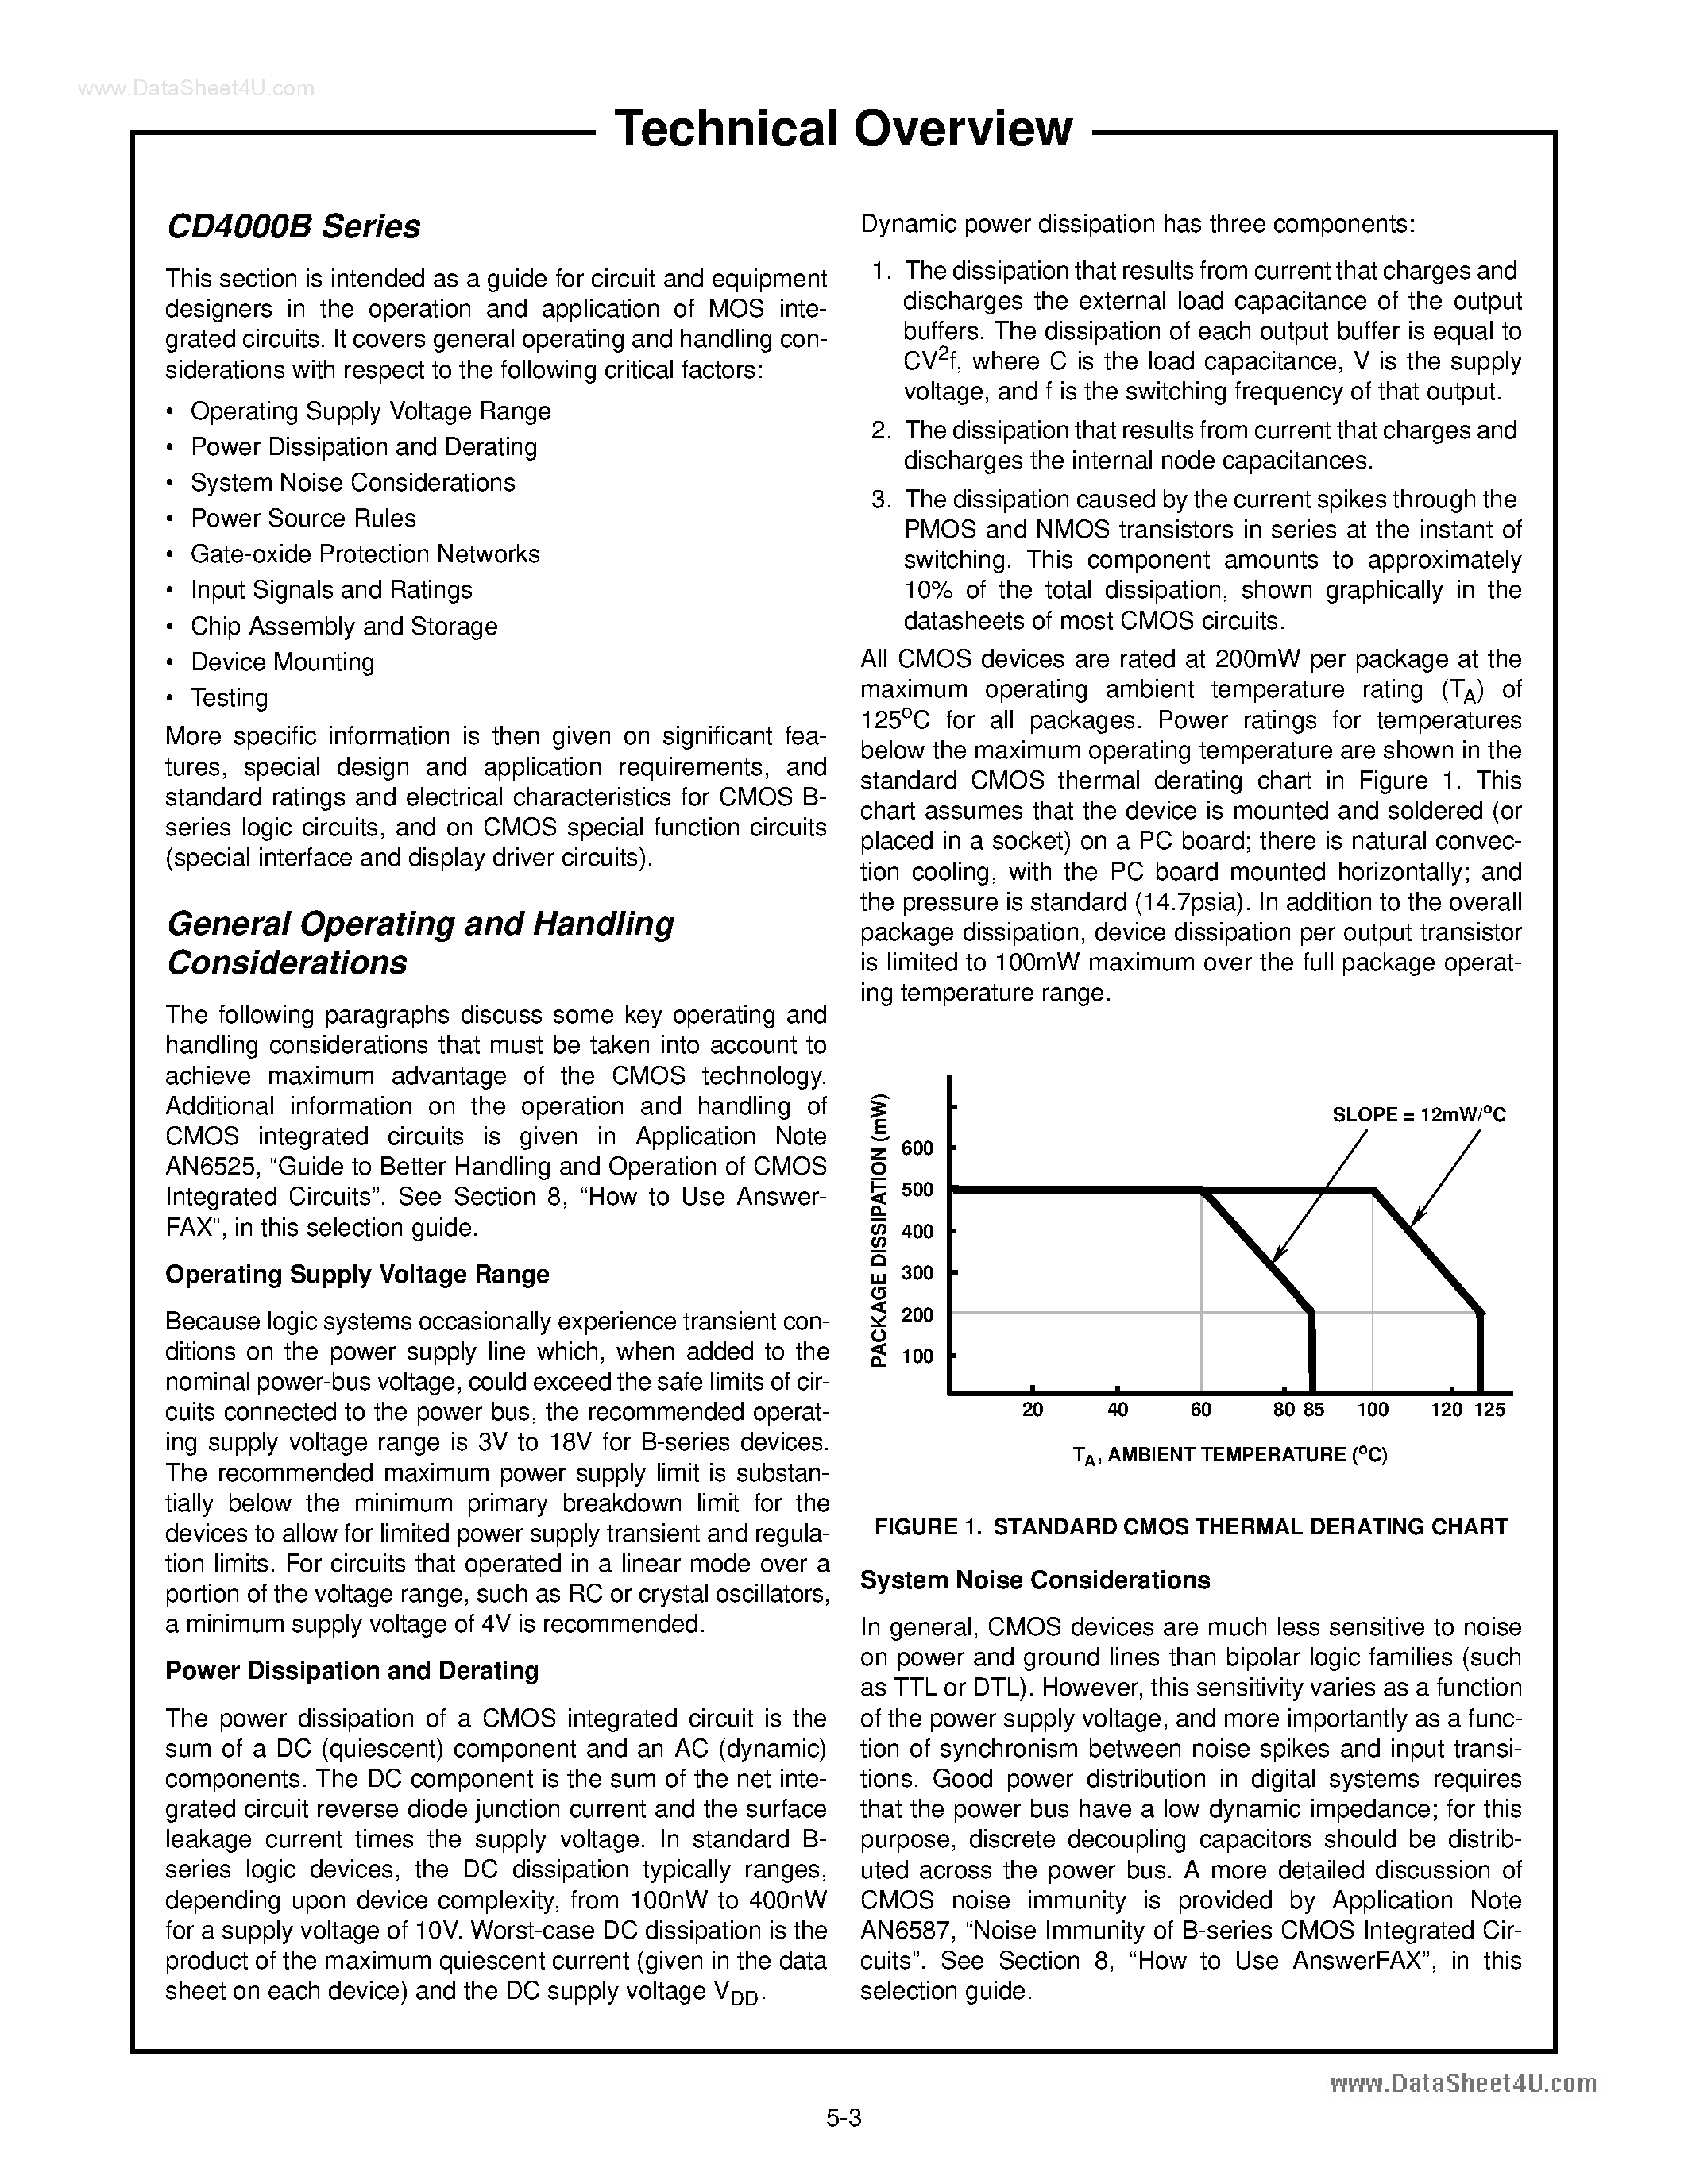 Datasheet CD4096B - (CD4000B Series) Technical Overview page 1